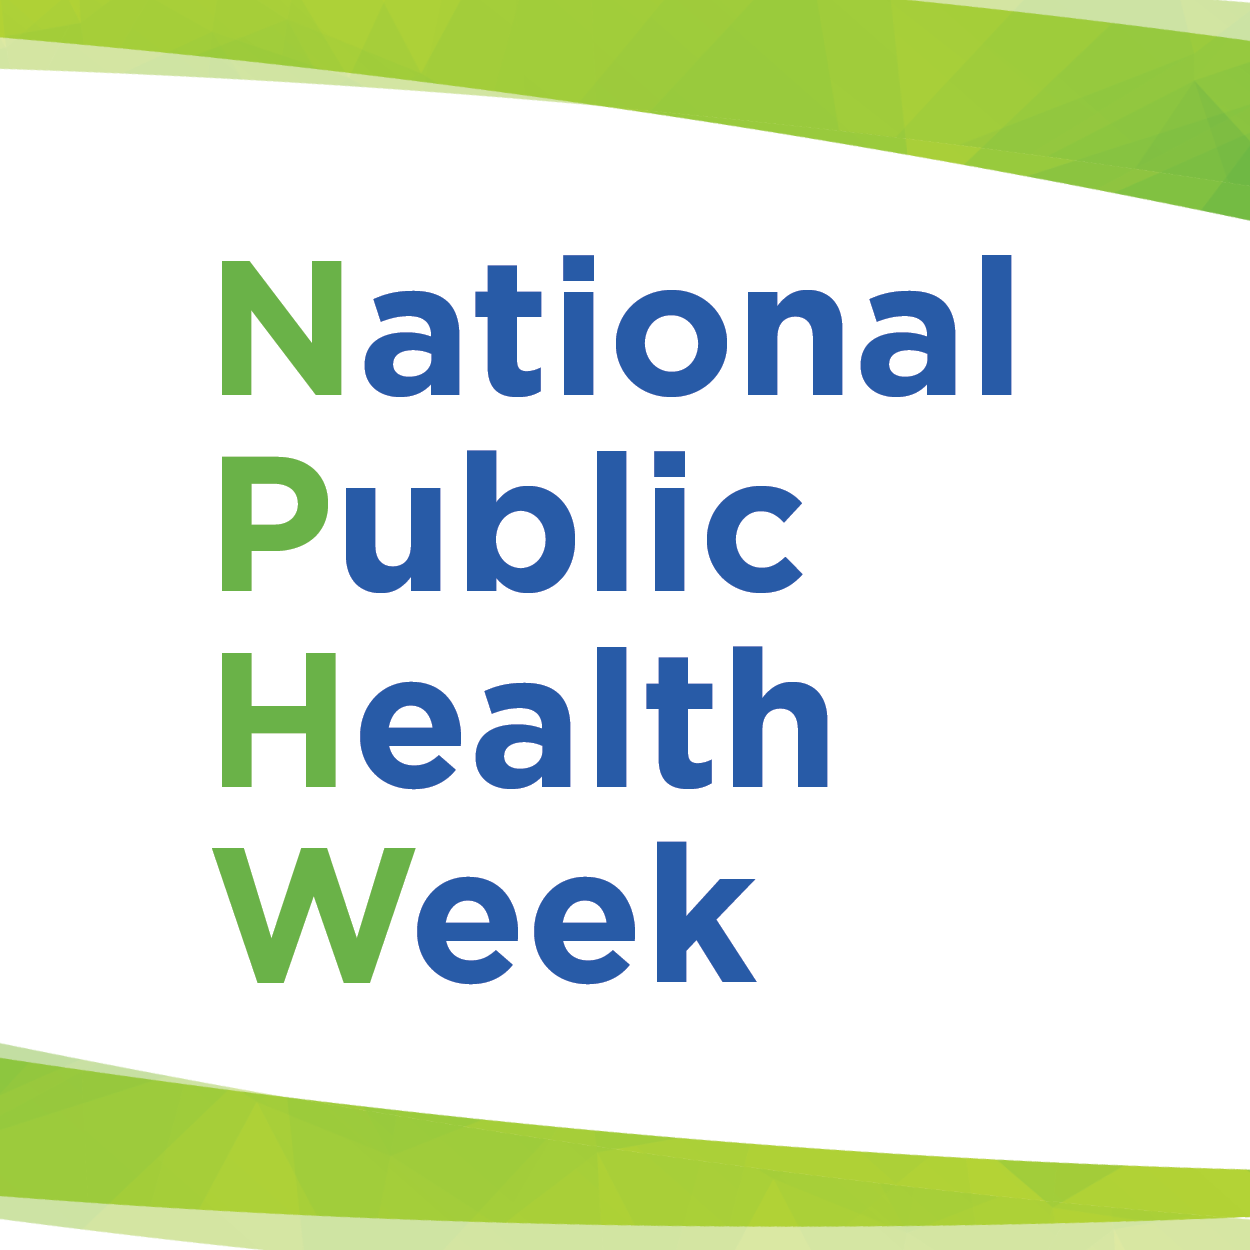 National public health week is written with the acronym NPHW forming on the left with each first letter in green font with the other letters being blue. There is a top and bottom border of green